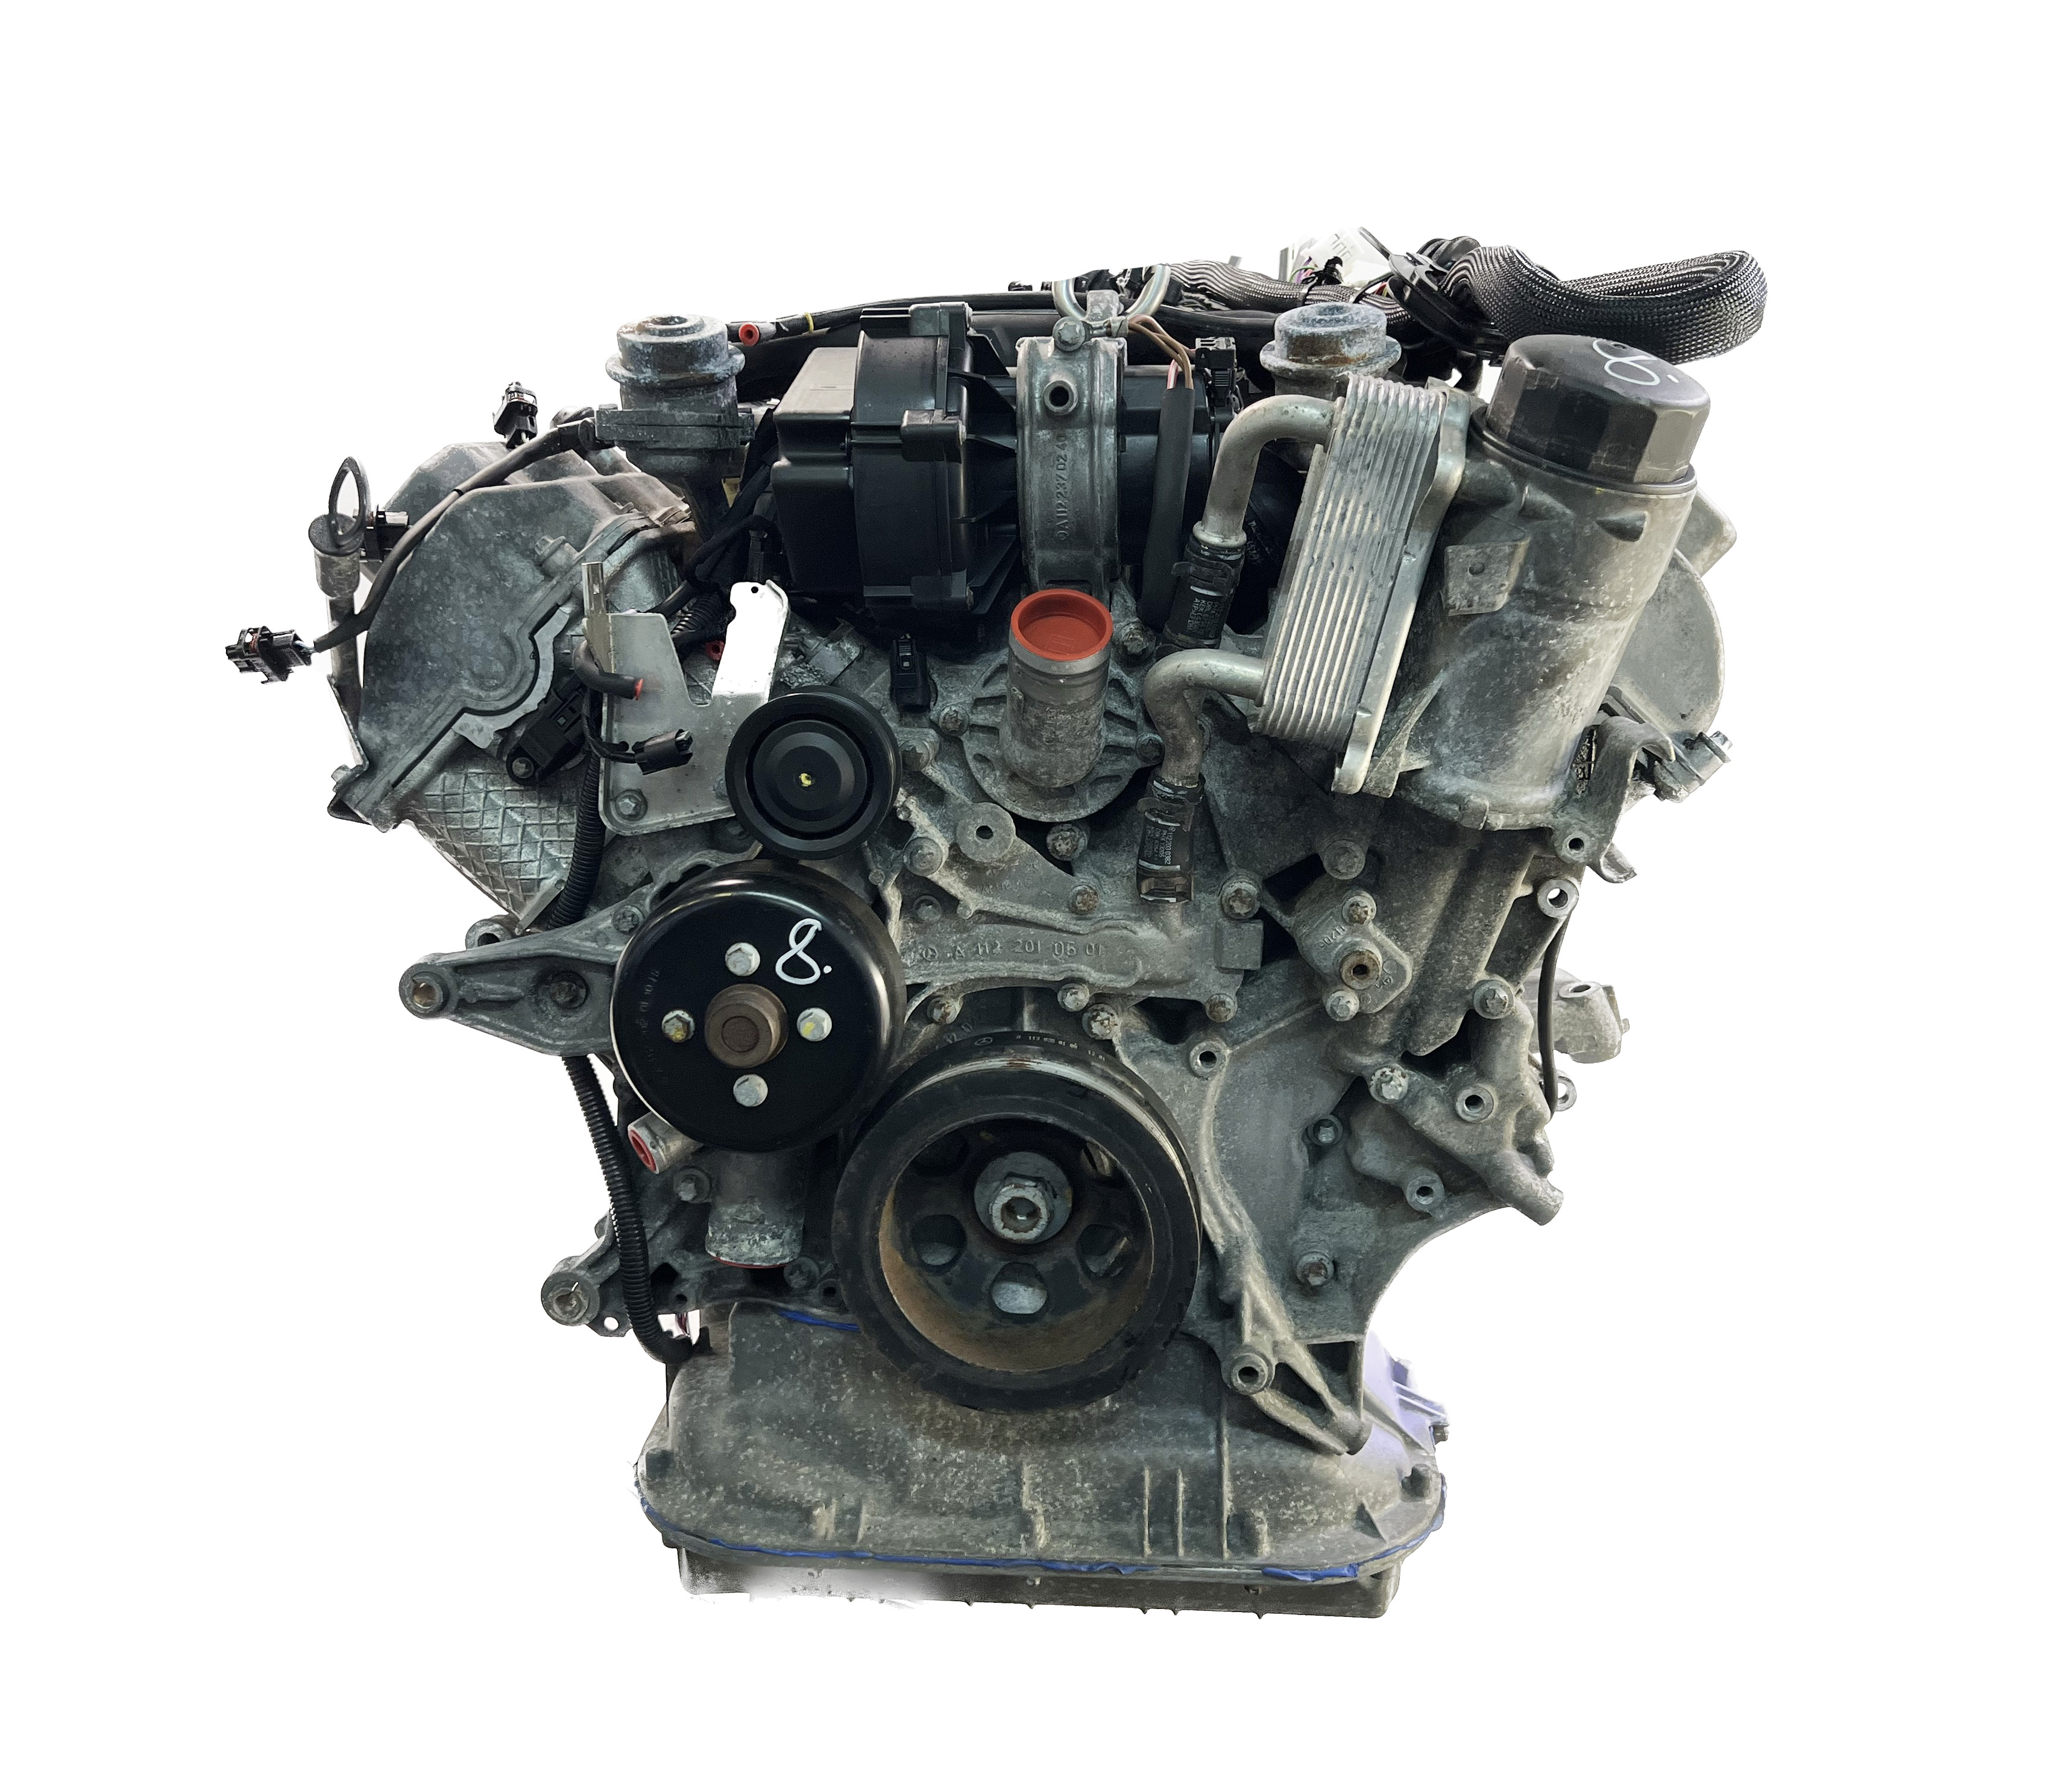 Mercedes S-Class 55 | V8 S Engine eBay W220 for 113.986 AMG C215 Benz 5.5 M113.986 CL